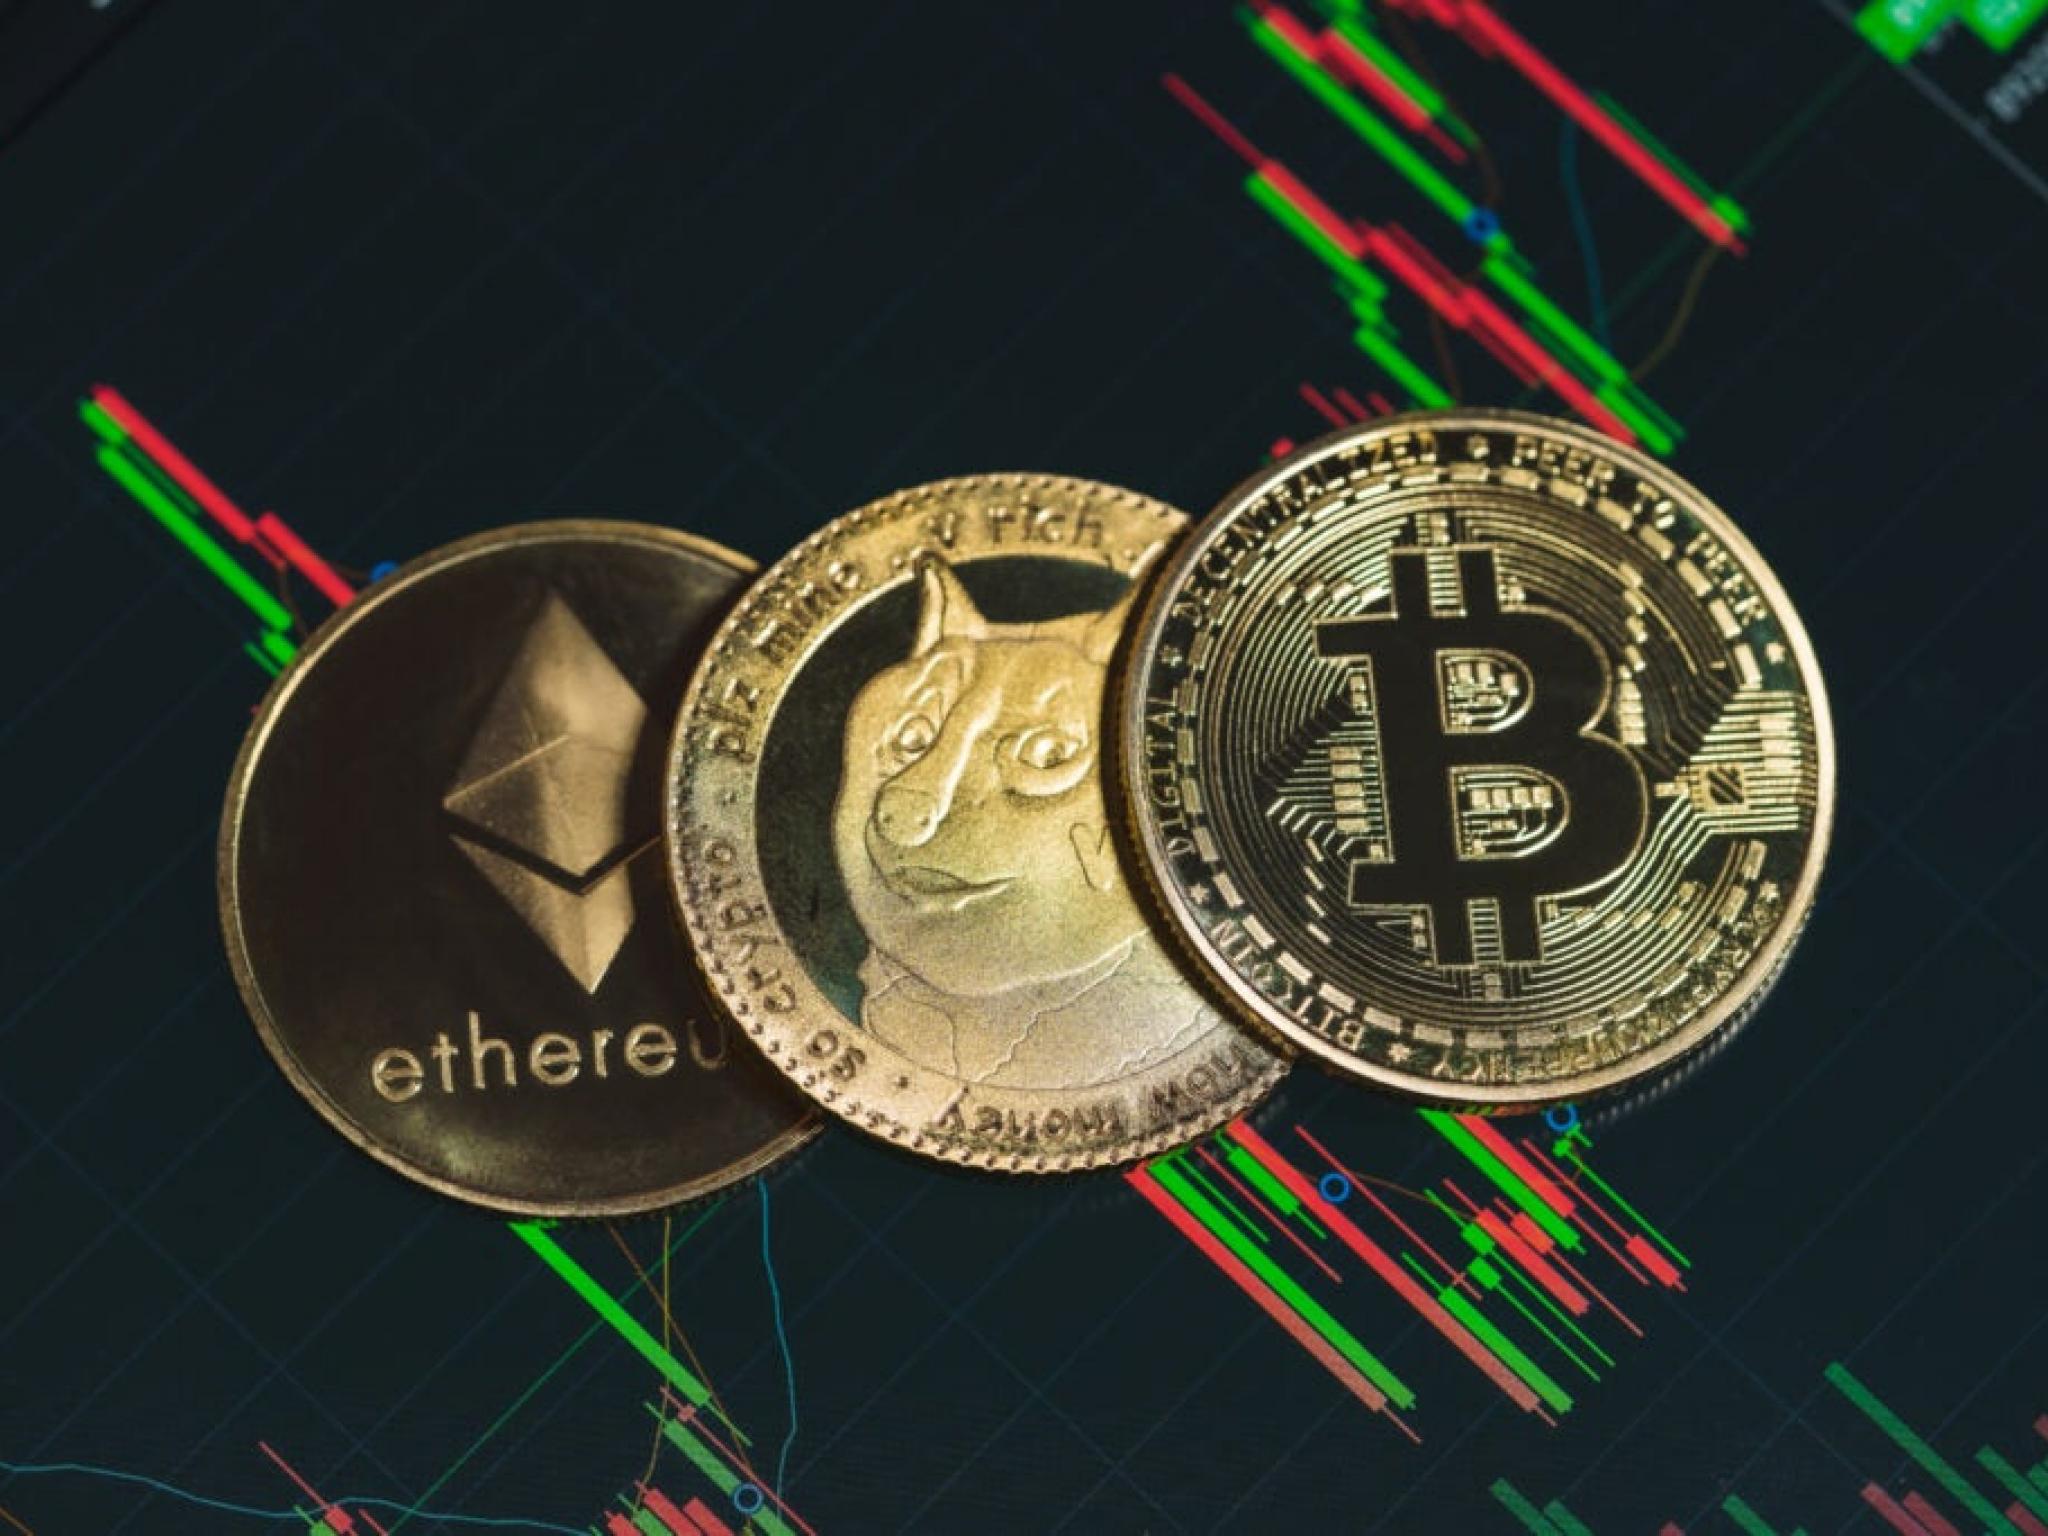  bitcoin-ethereum-dogecoin-rally-vaneck-files-solana-etf-application-but-dont-get-too-excited-yet-warns-trader 